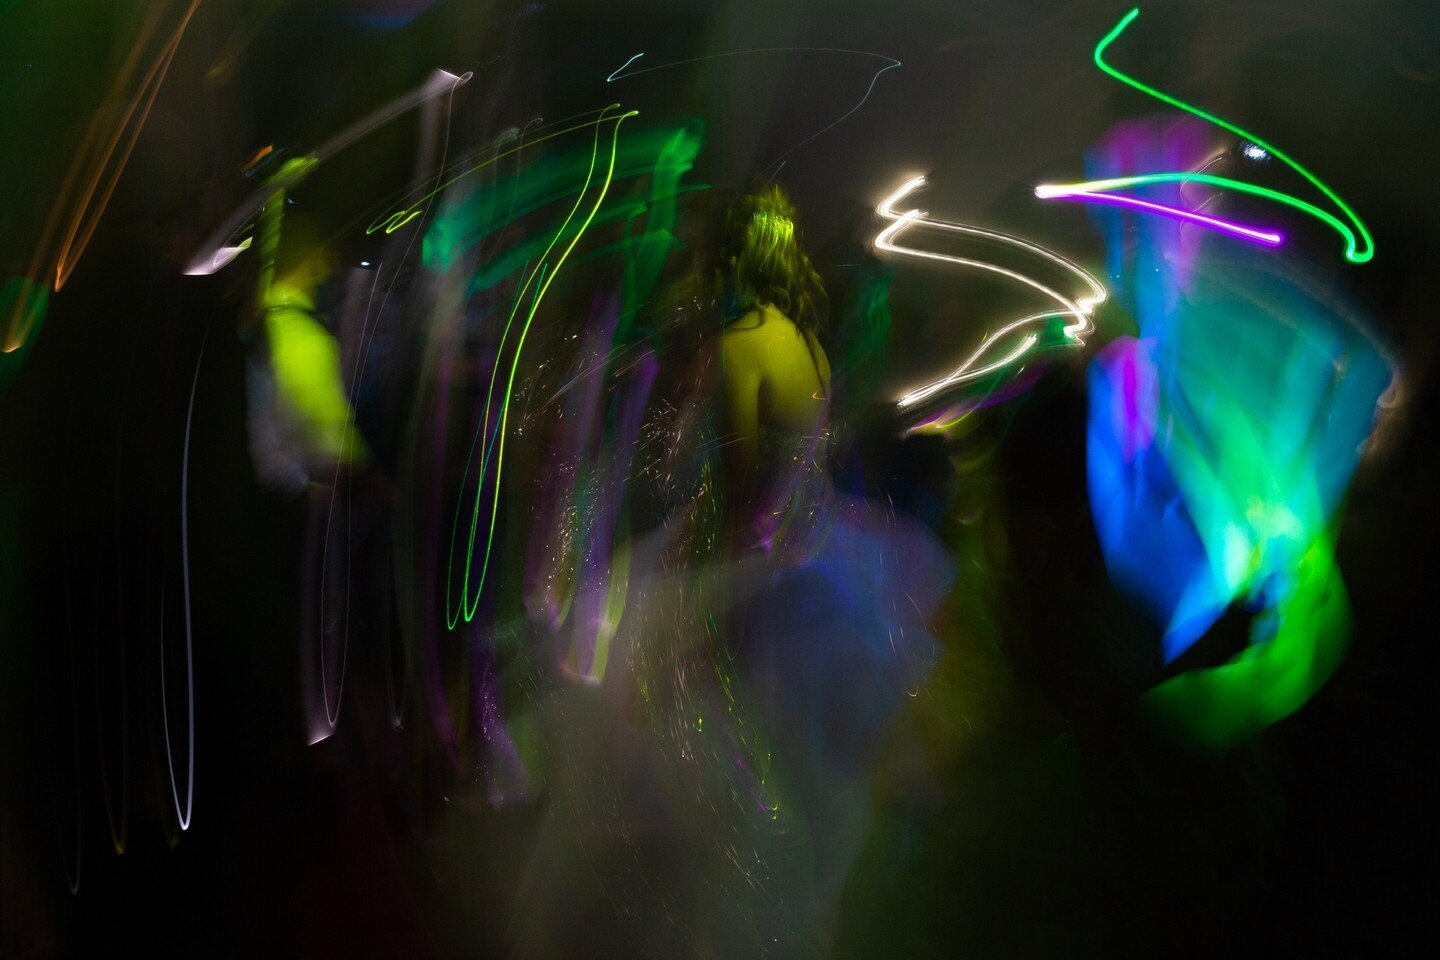 I love creating experimental long exposures on the dance floor after finishing the shot list for my clients. Getting a fun shot of the bride partying on the dance floor is such a fun way to end the night!!!!
.
.
.
.
@theknot @weddingwire @weddingpro 